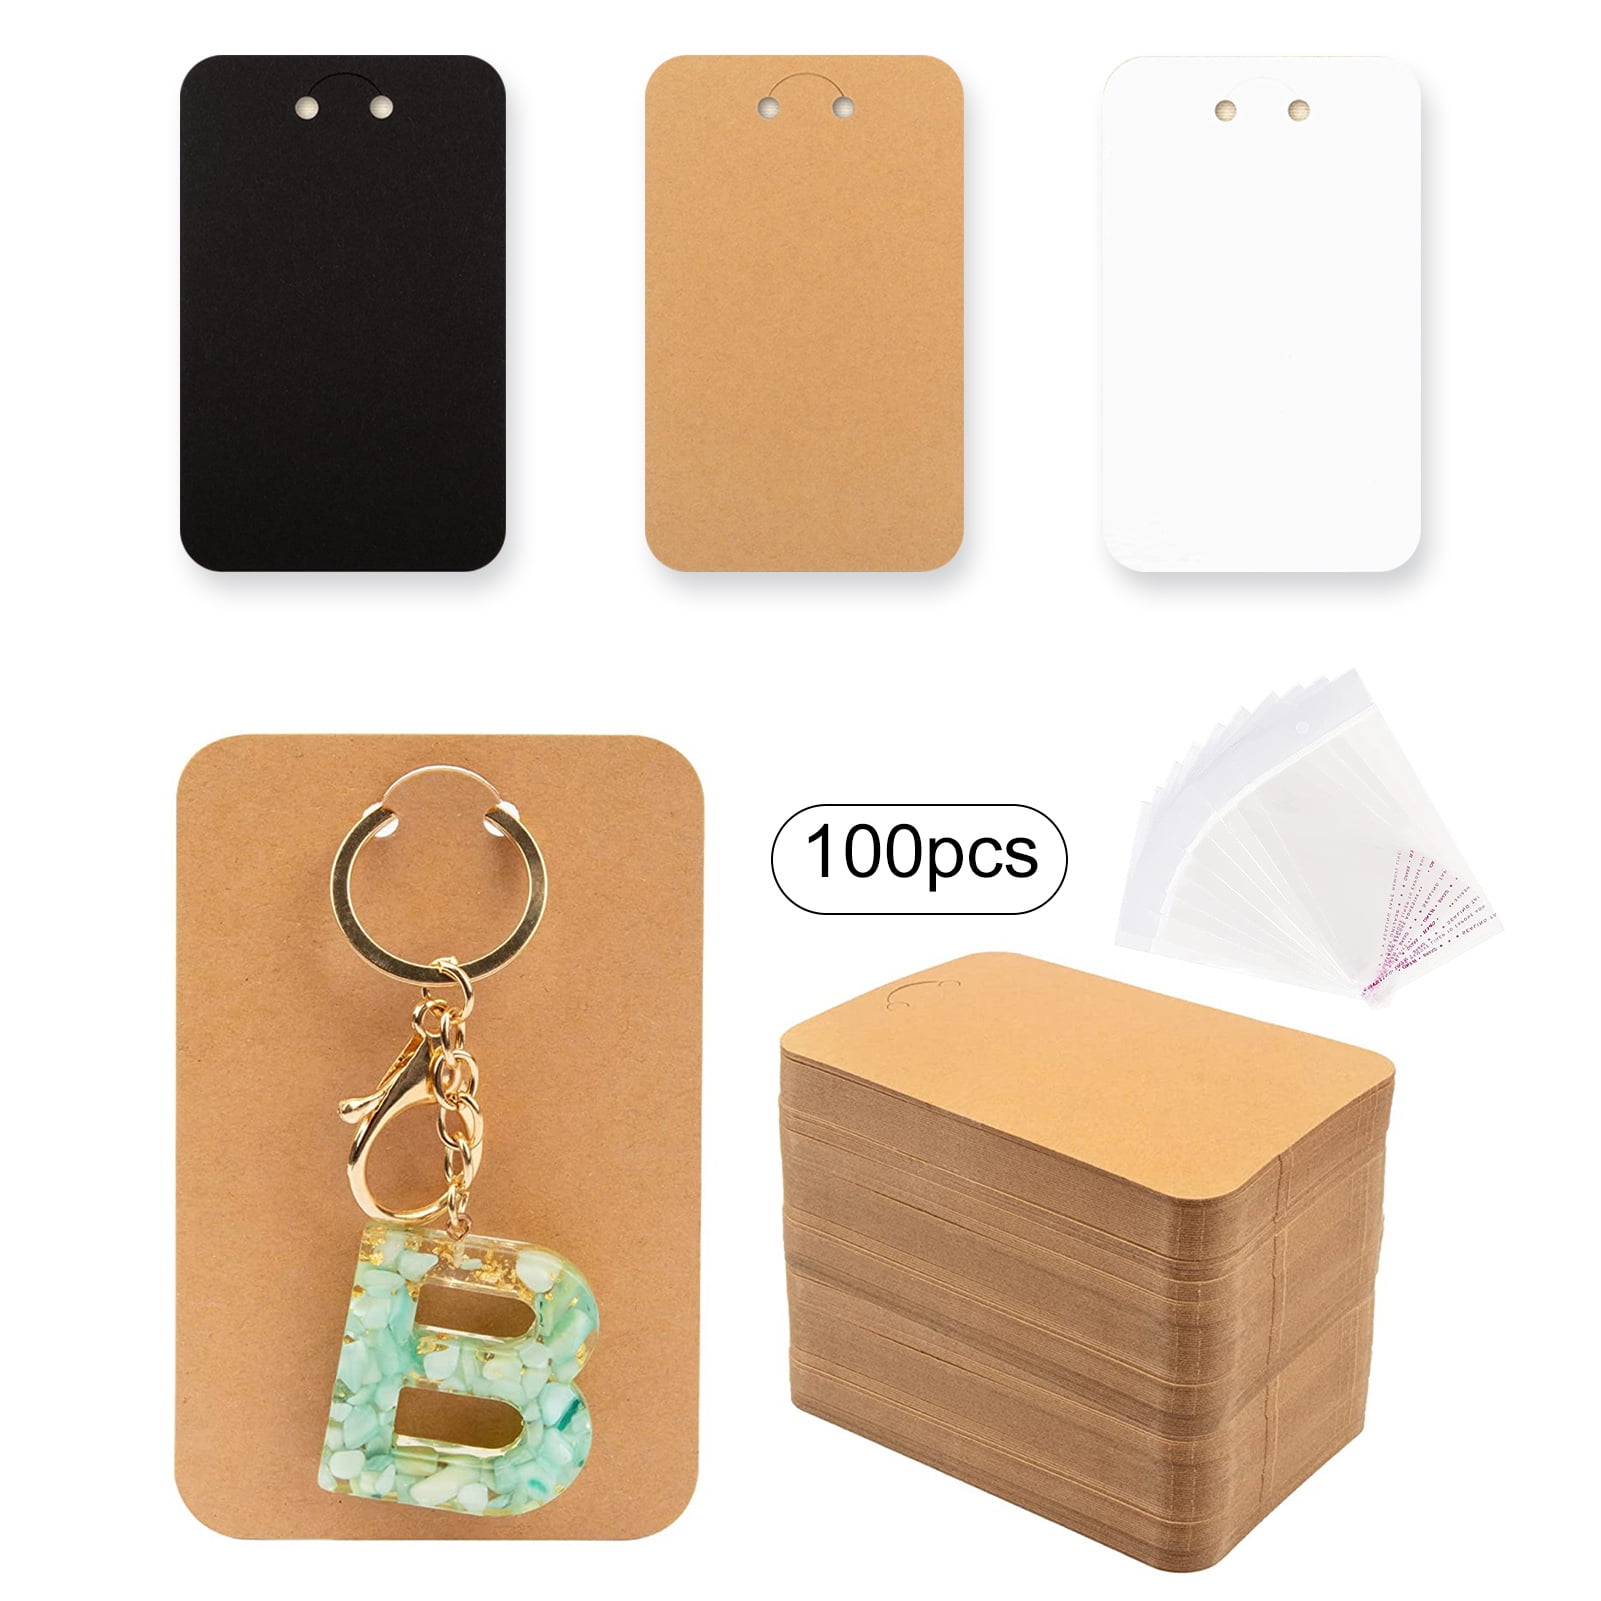  320 Pcs Keychain Display Cards Self Sealing Bags 2.3 x 3.5 Inch  Jewelry Cards for Selling Small Business Necklace Packaging (Black) :  Office Products